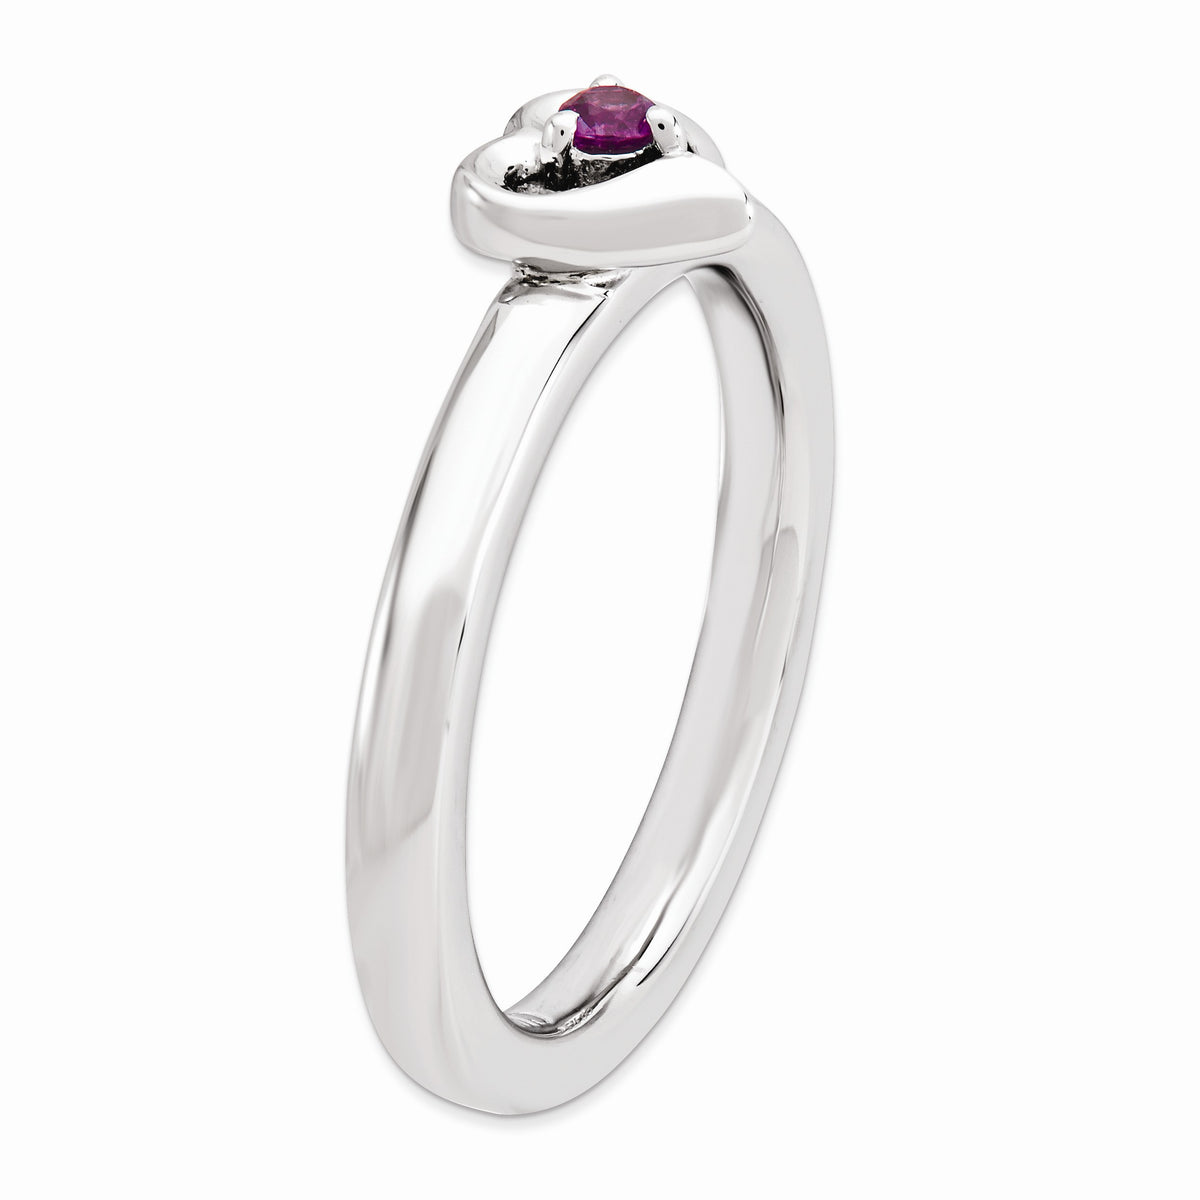 Alternate view of the Sterling Silver Stackable Expressions Rhodolite Garnet 6mm Heart Ring by The Black Bow Jewelry Co.